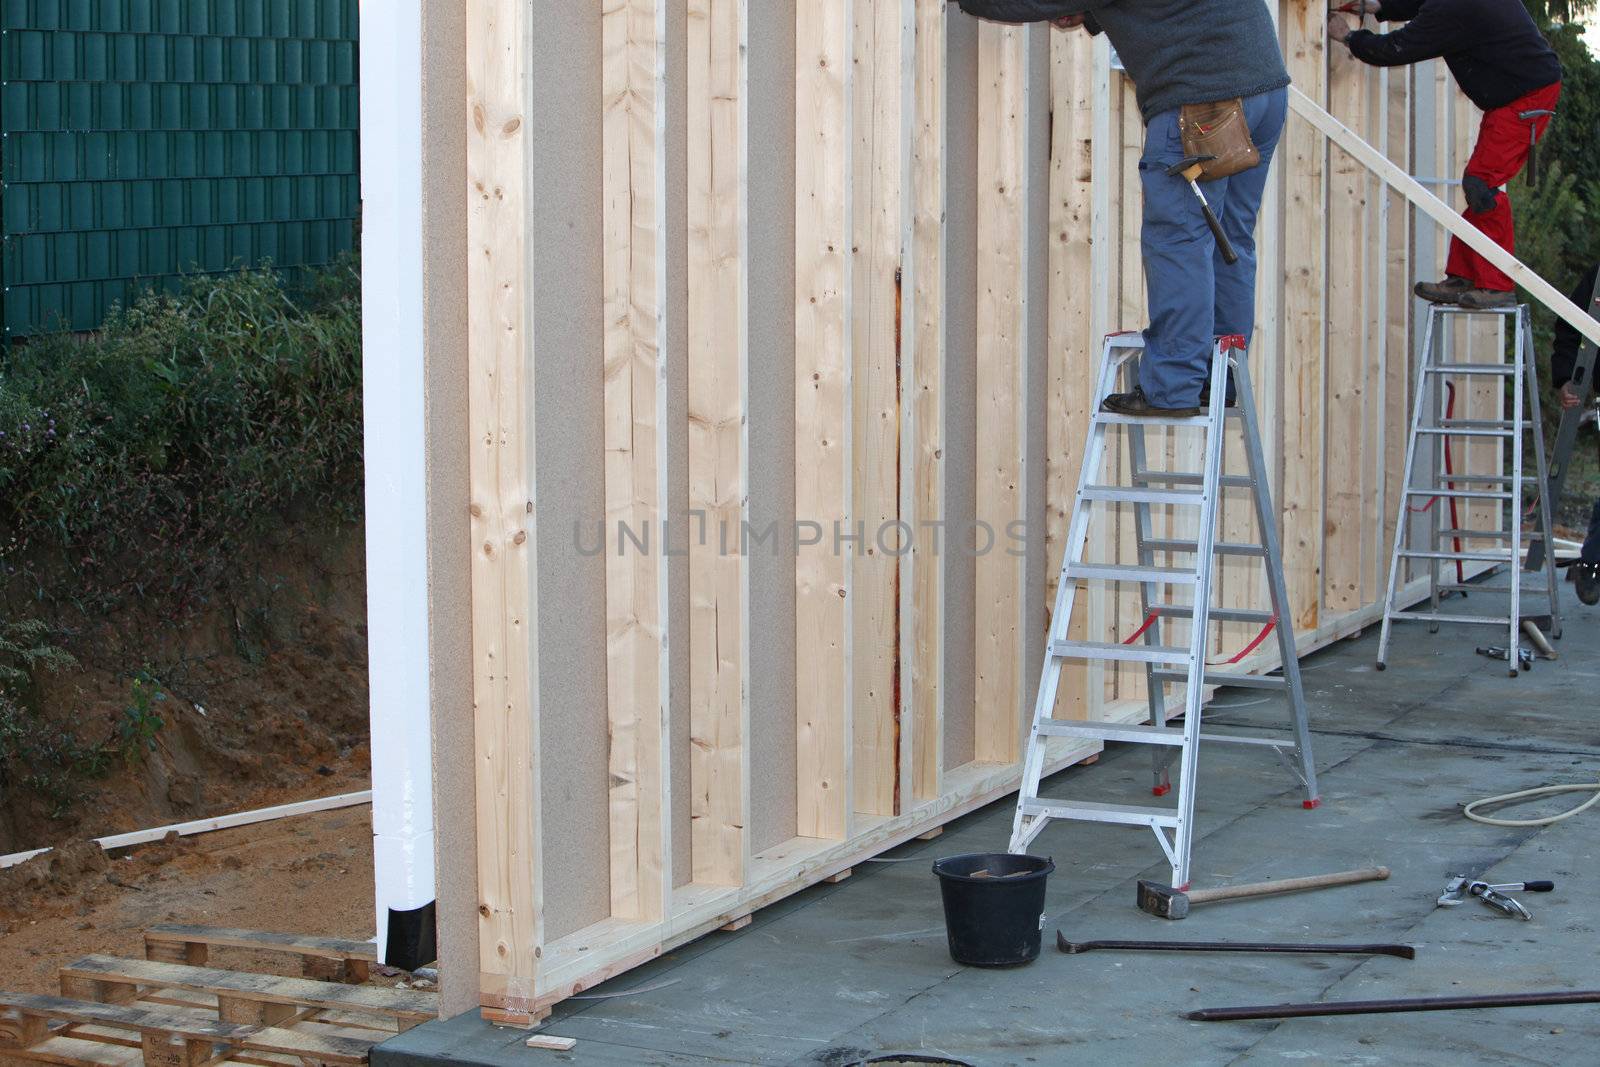 Builders standing on ladders installing a prefabricated exterior wall of a timber frame house on a cement foundation